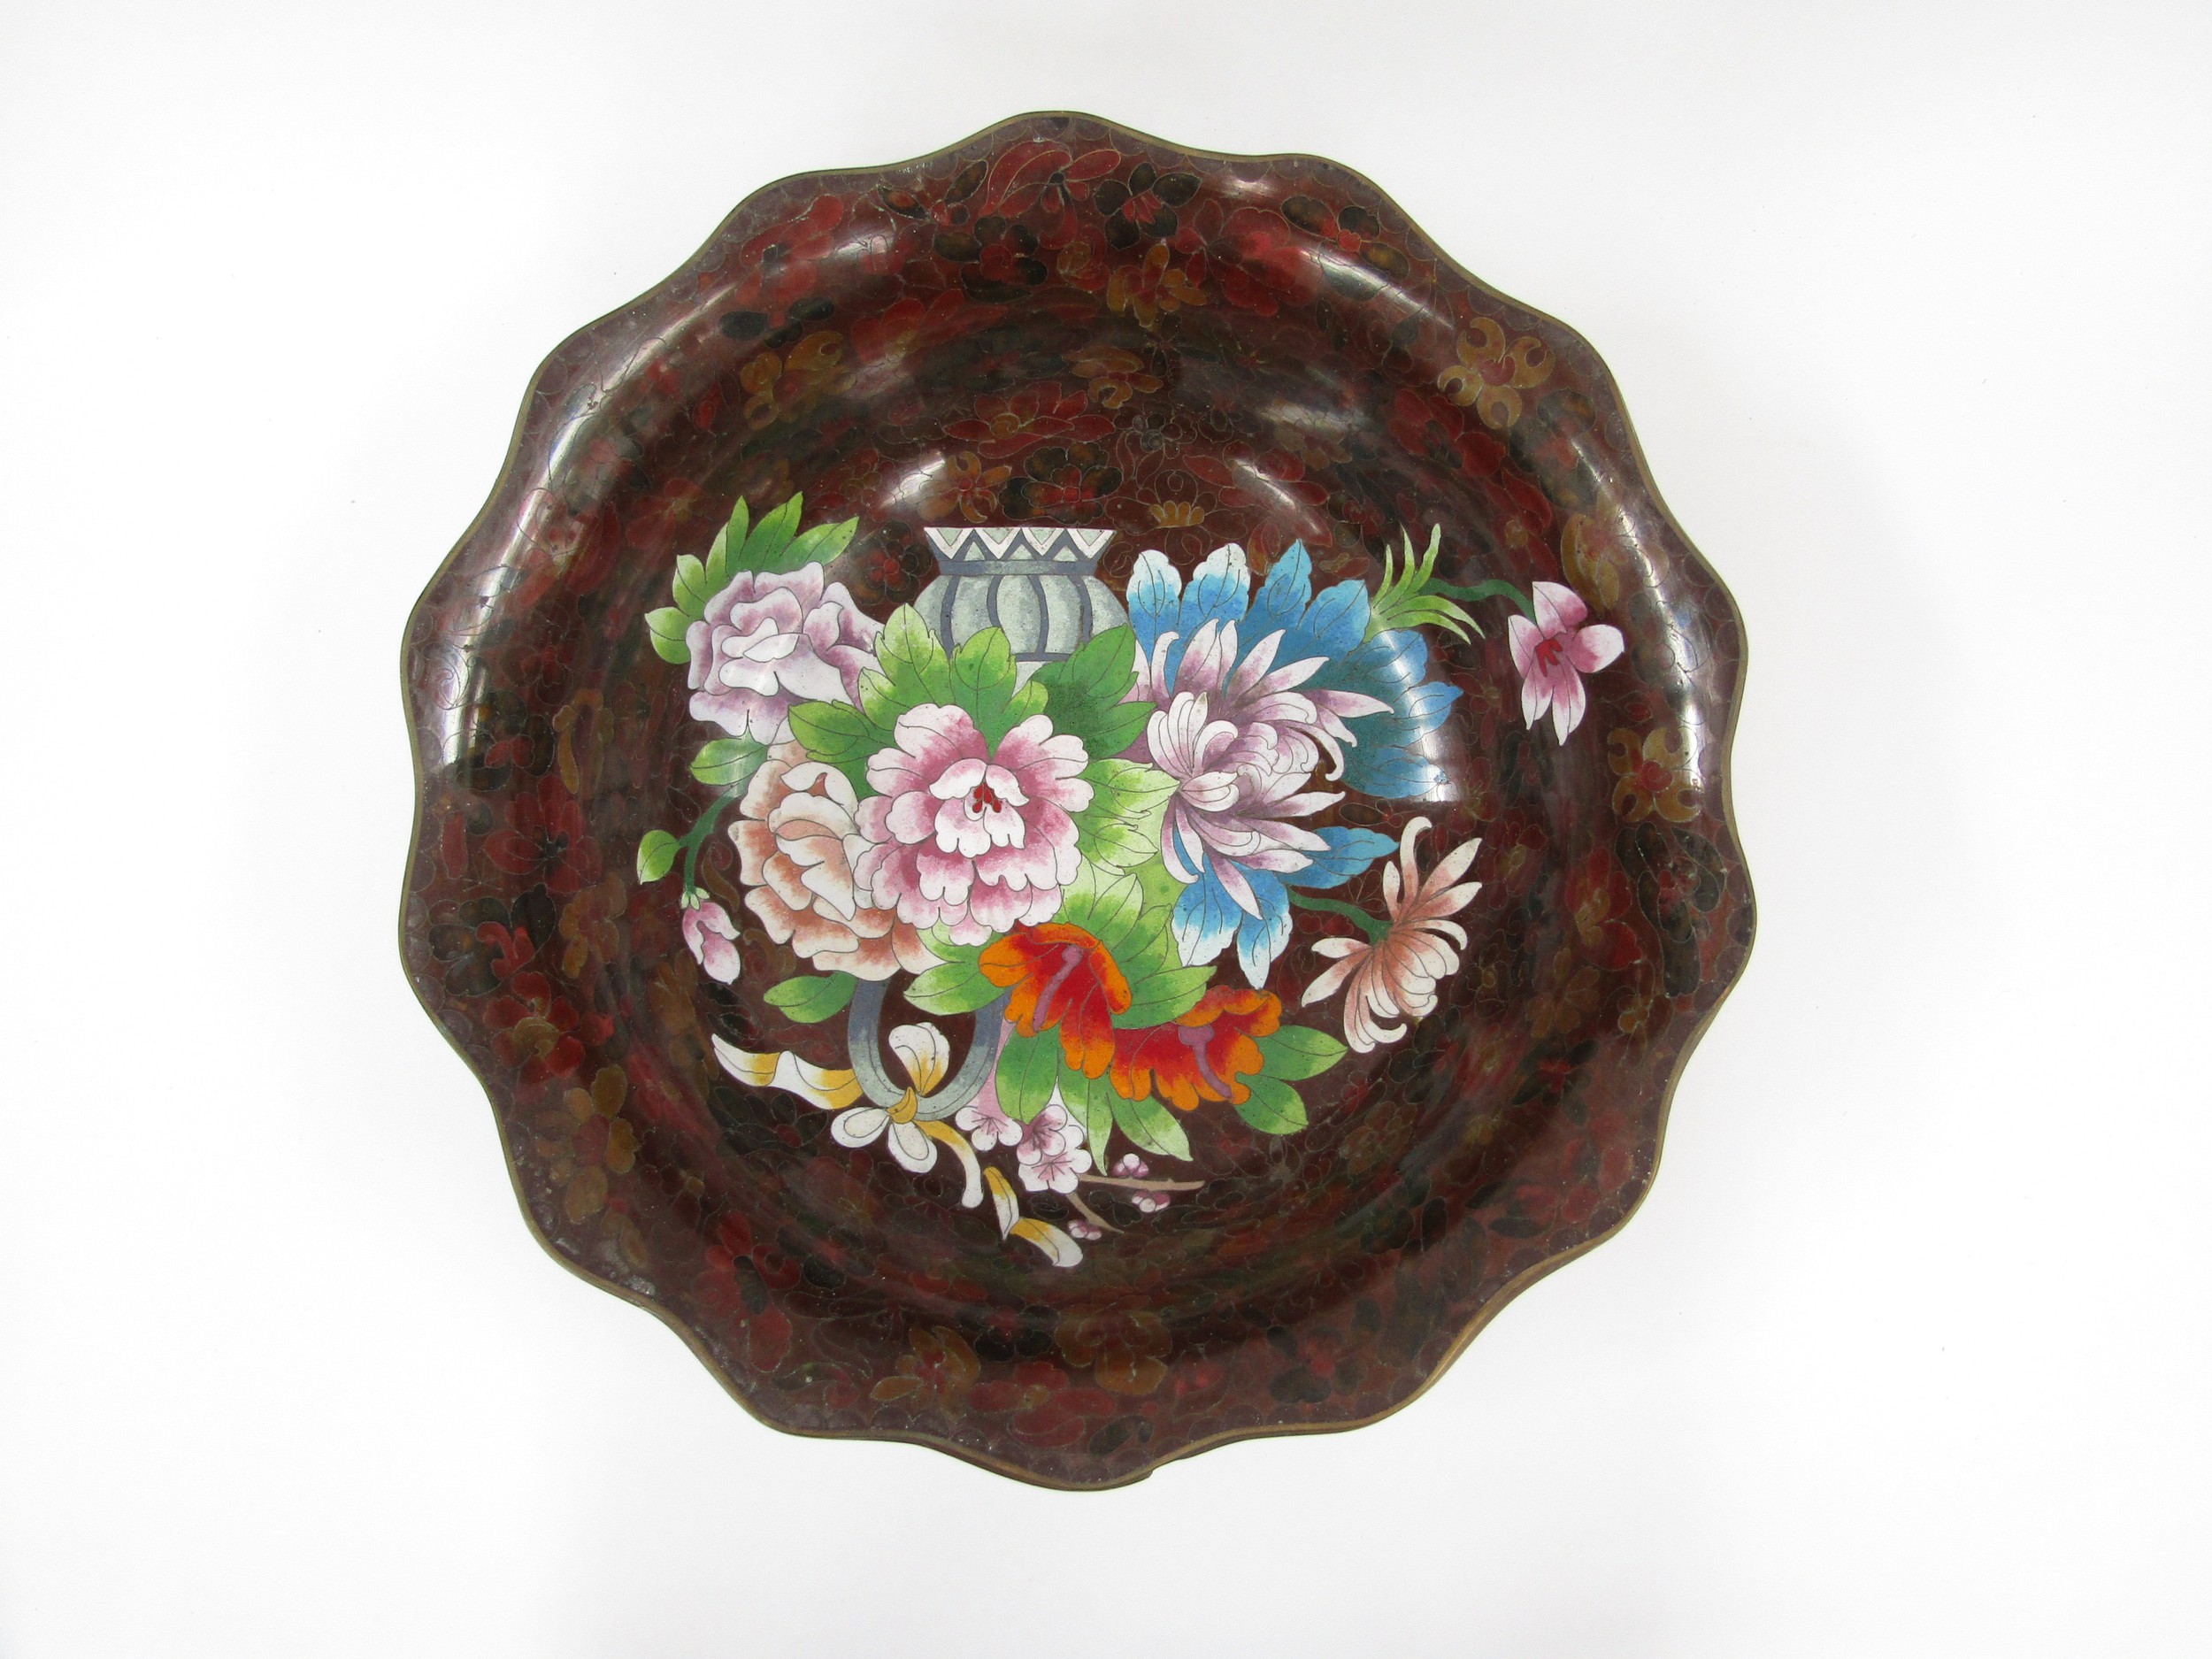 A large Republic Period Chinese cloisonné enamel bowl with Famille rose decoration on a rich rouge